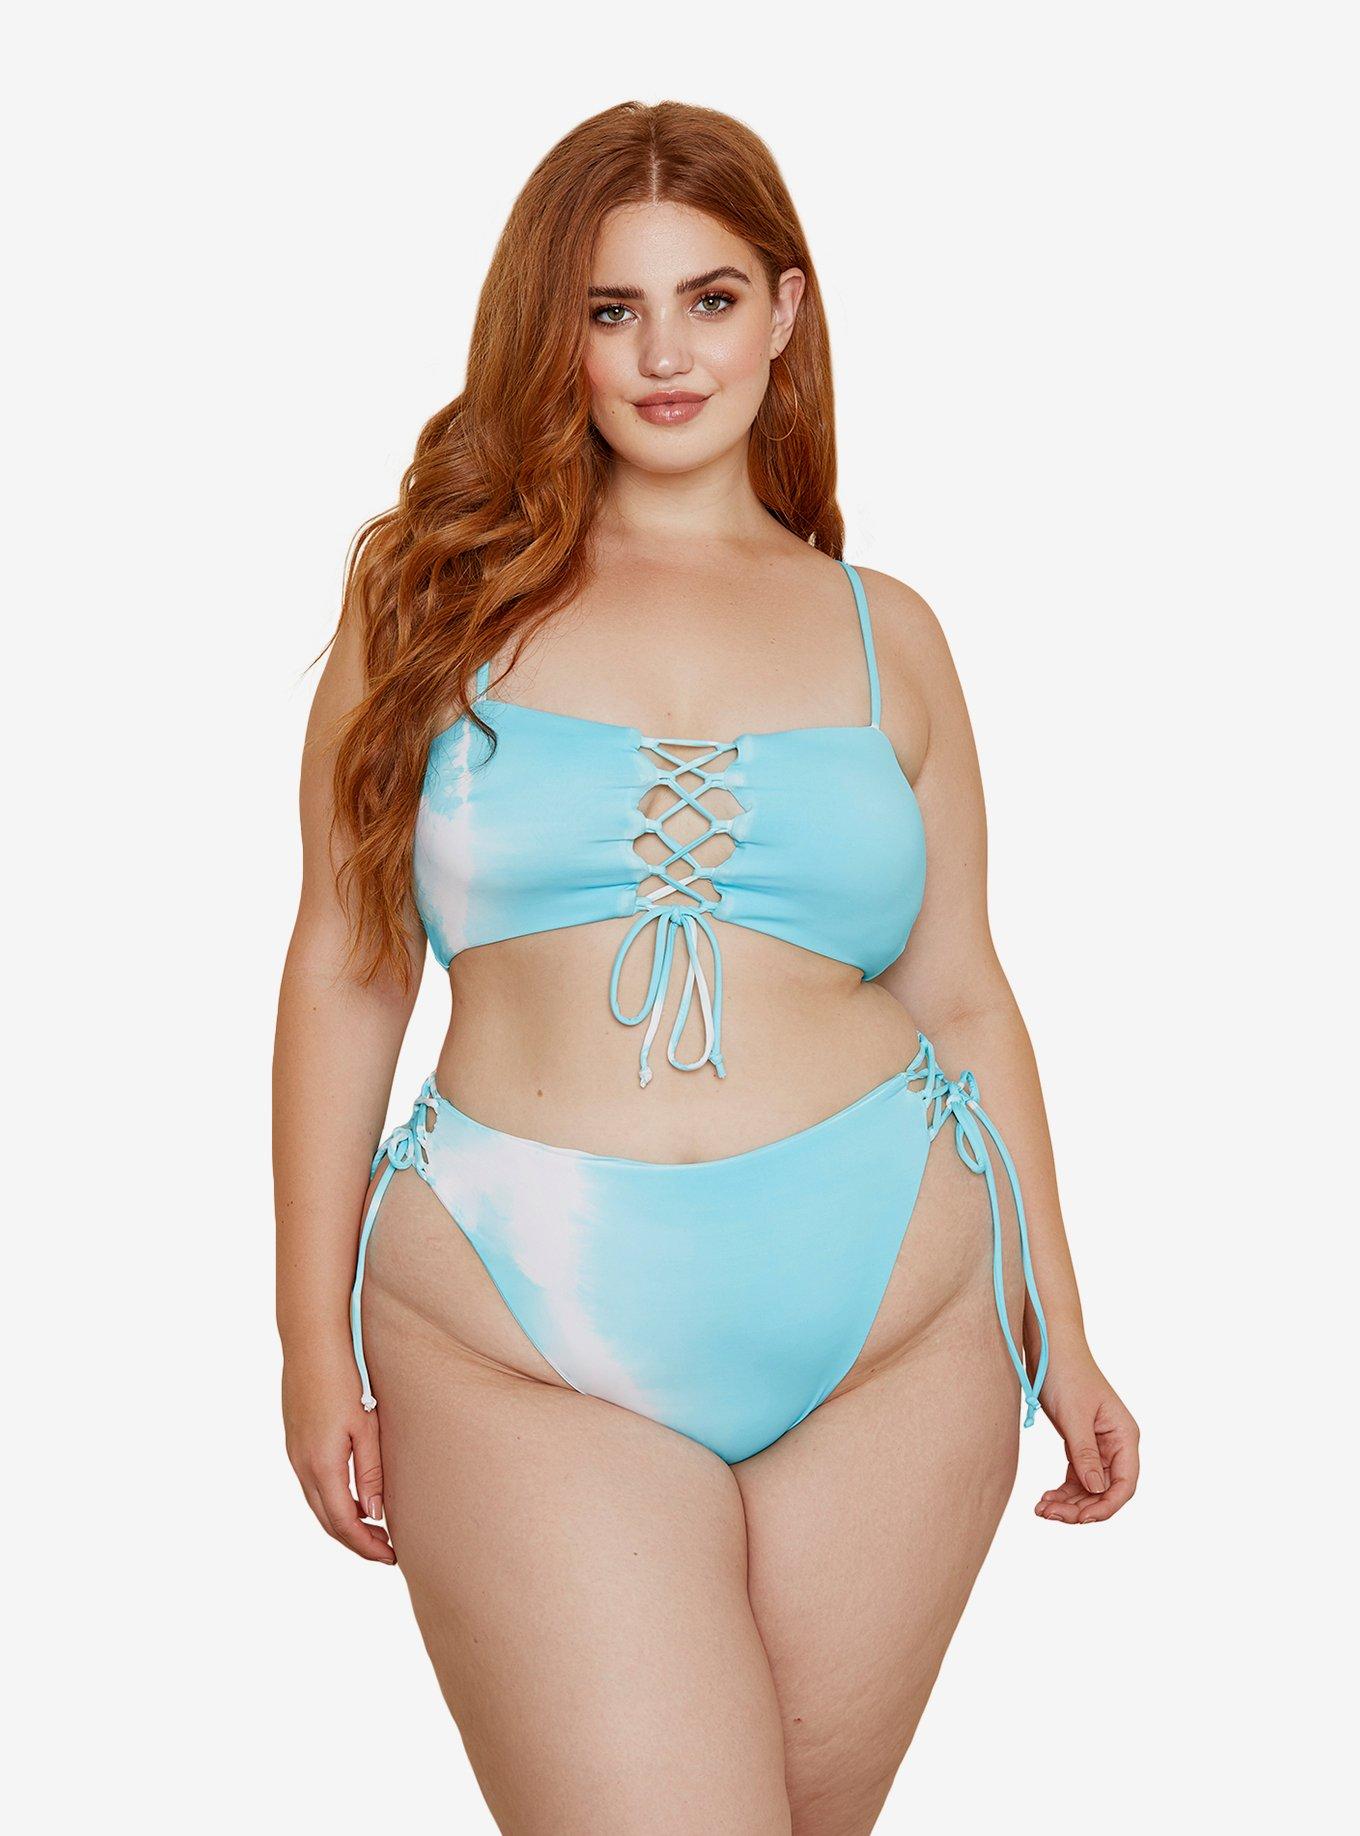 Dippin' Daisy's Pacifica Swim Top Crystal Tie Dye Plus Size, BLUE, hi-res